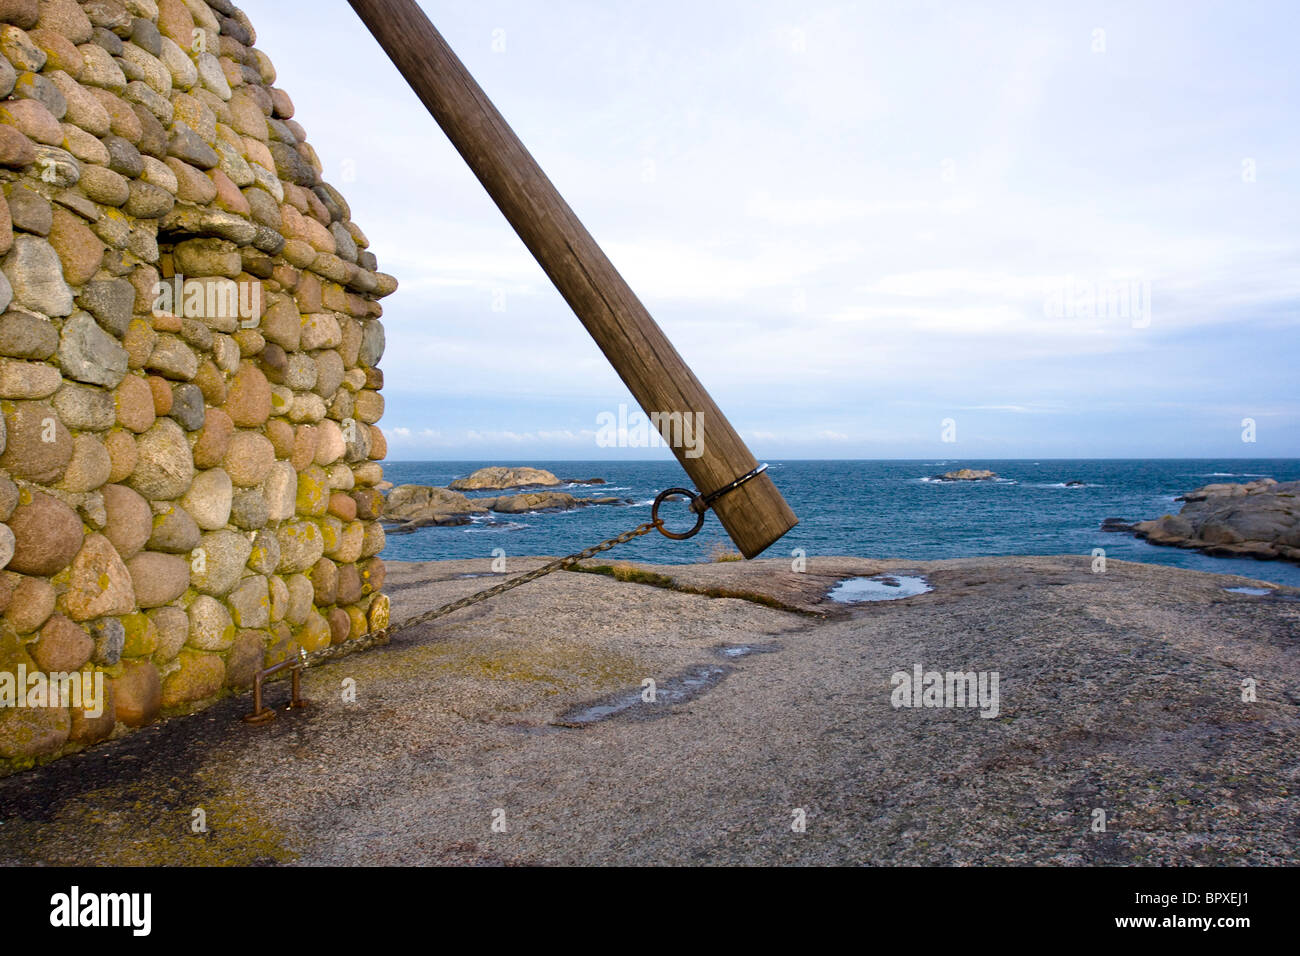 A traditional stone lighthouse on the coast at Verdens Ende, Tjome, Norway. Stock Photo